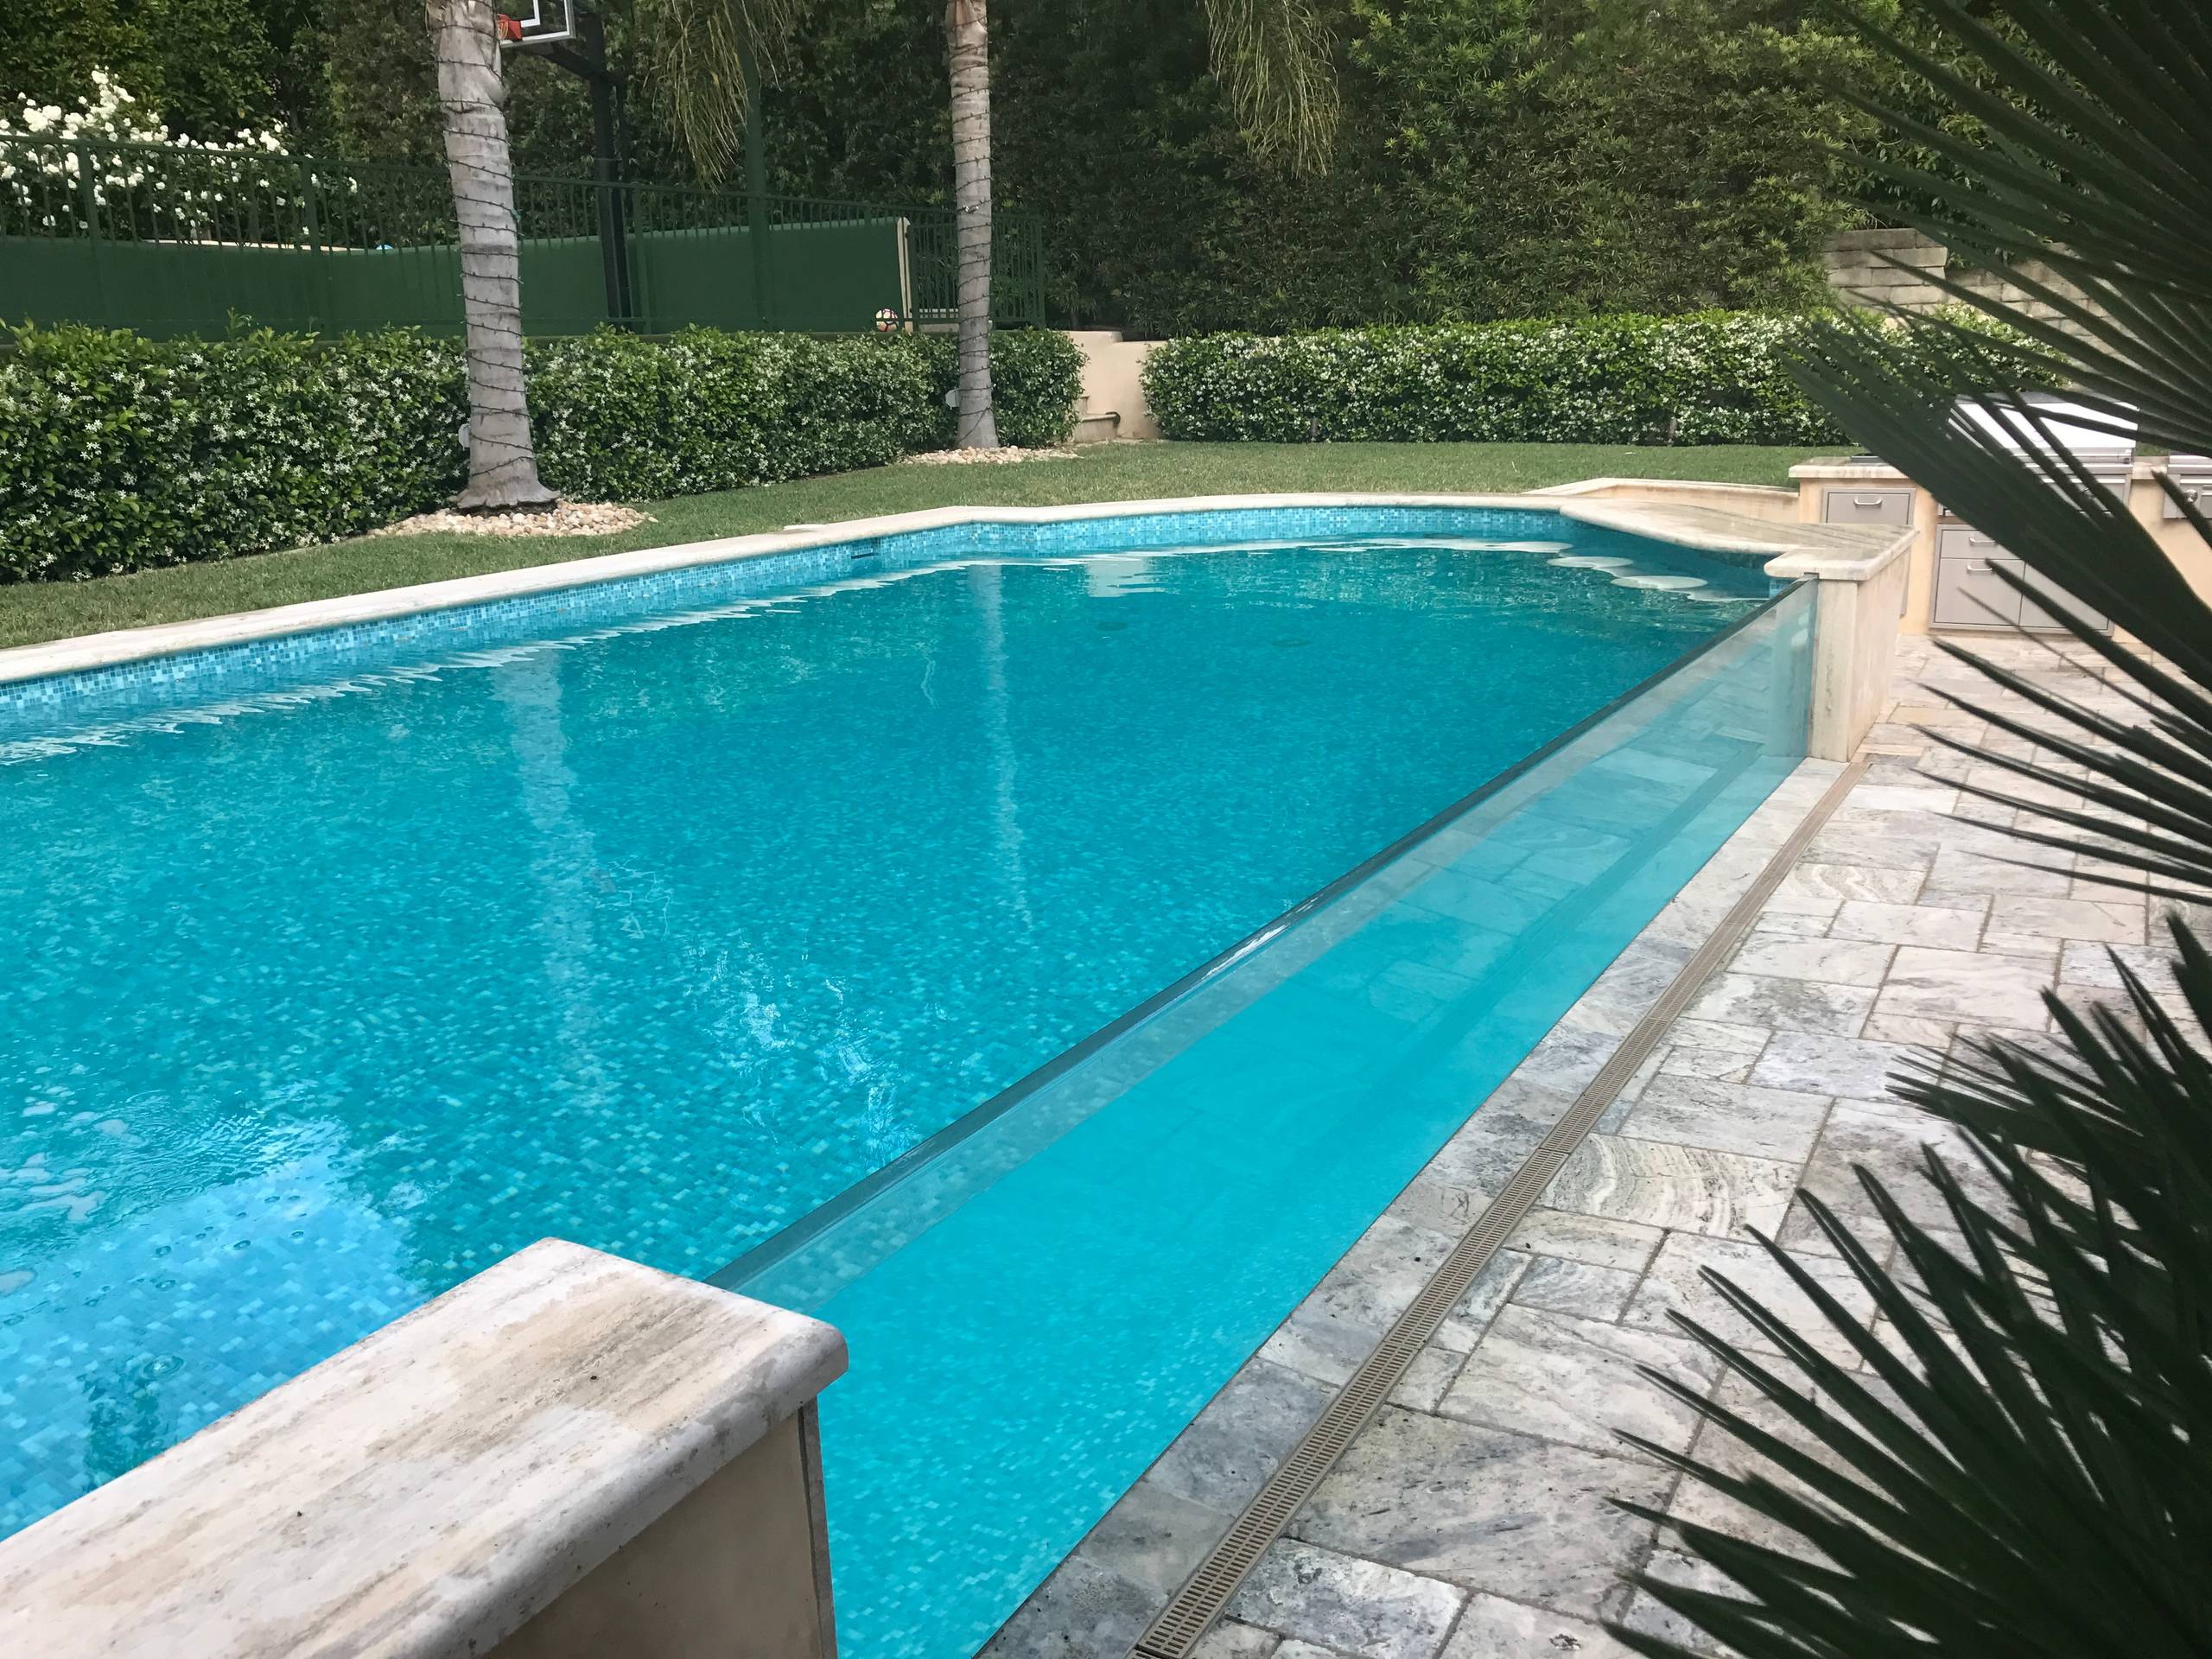 Bel Air Tile Swimming Pool with Acrylic Wall to see into pool